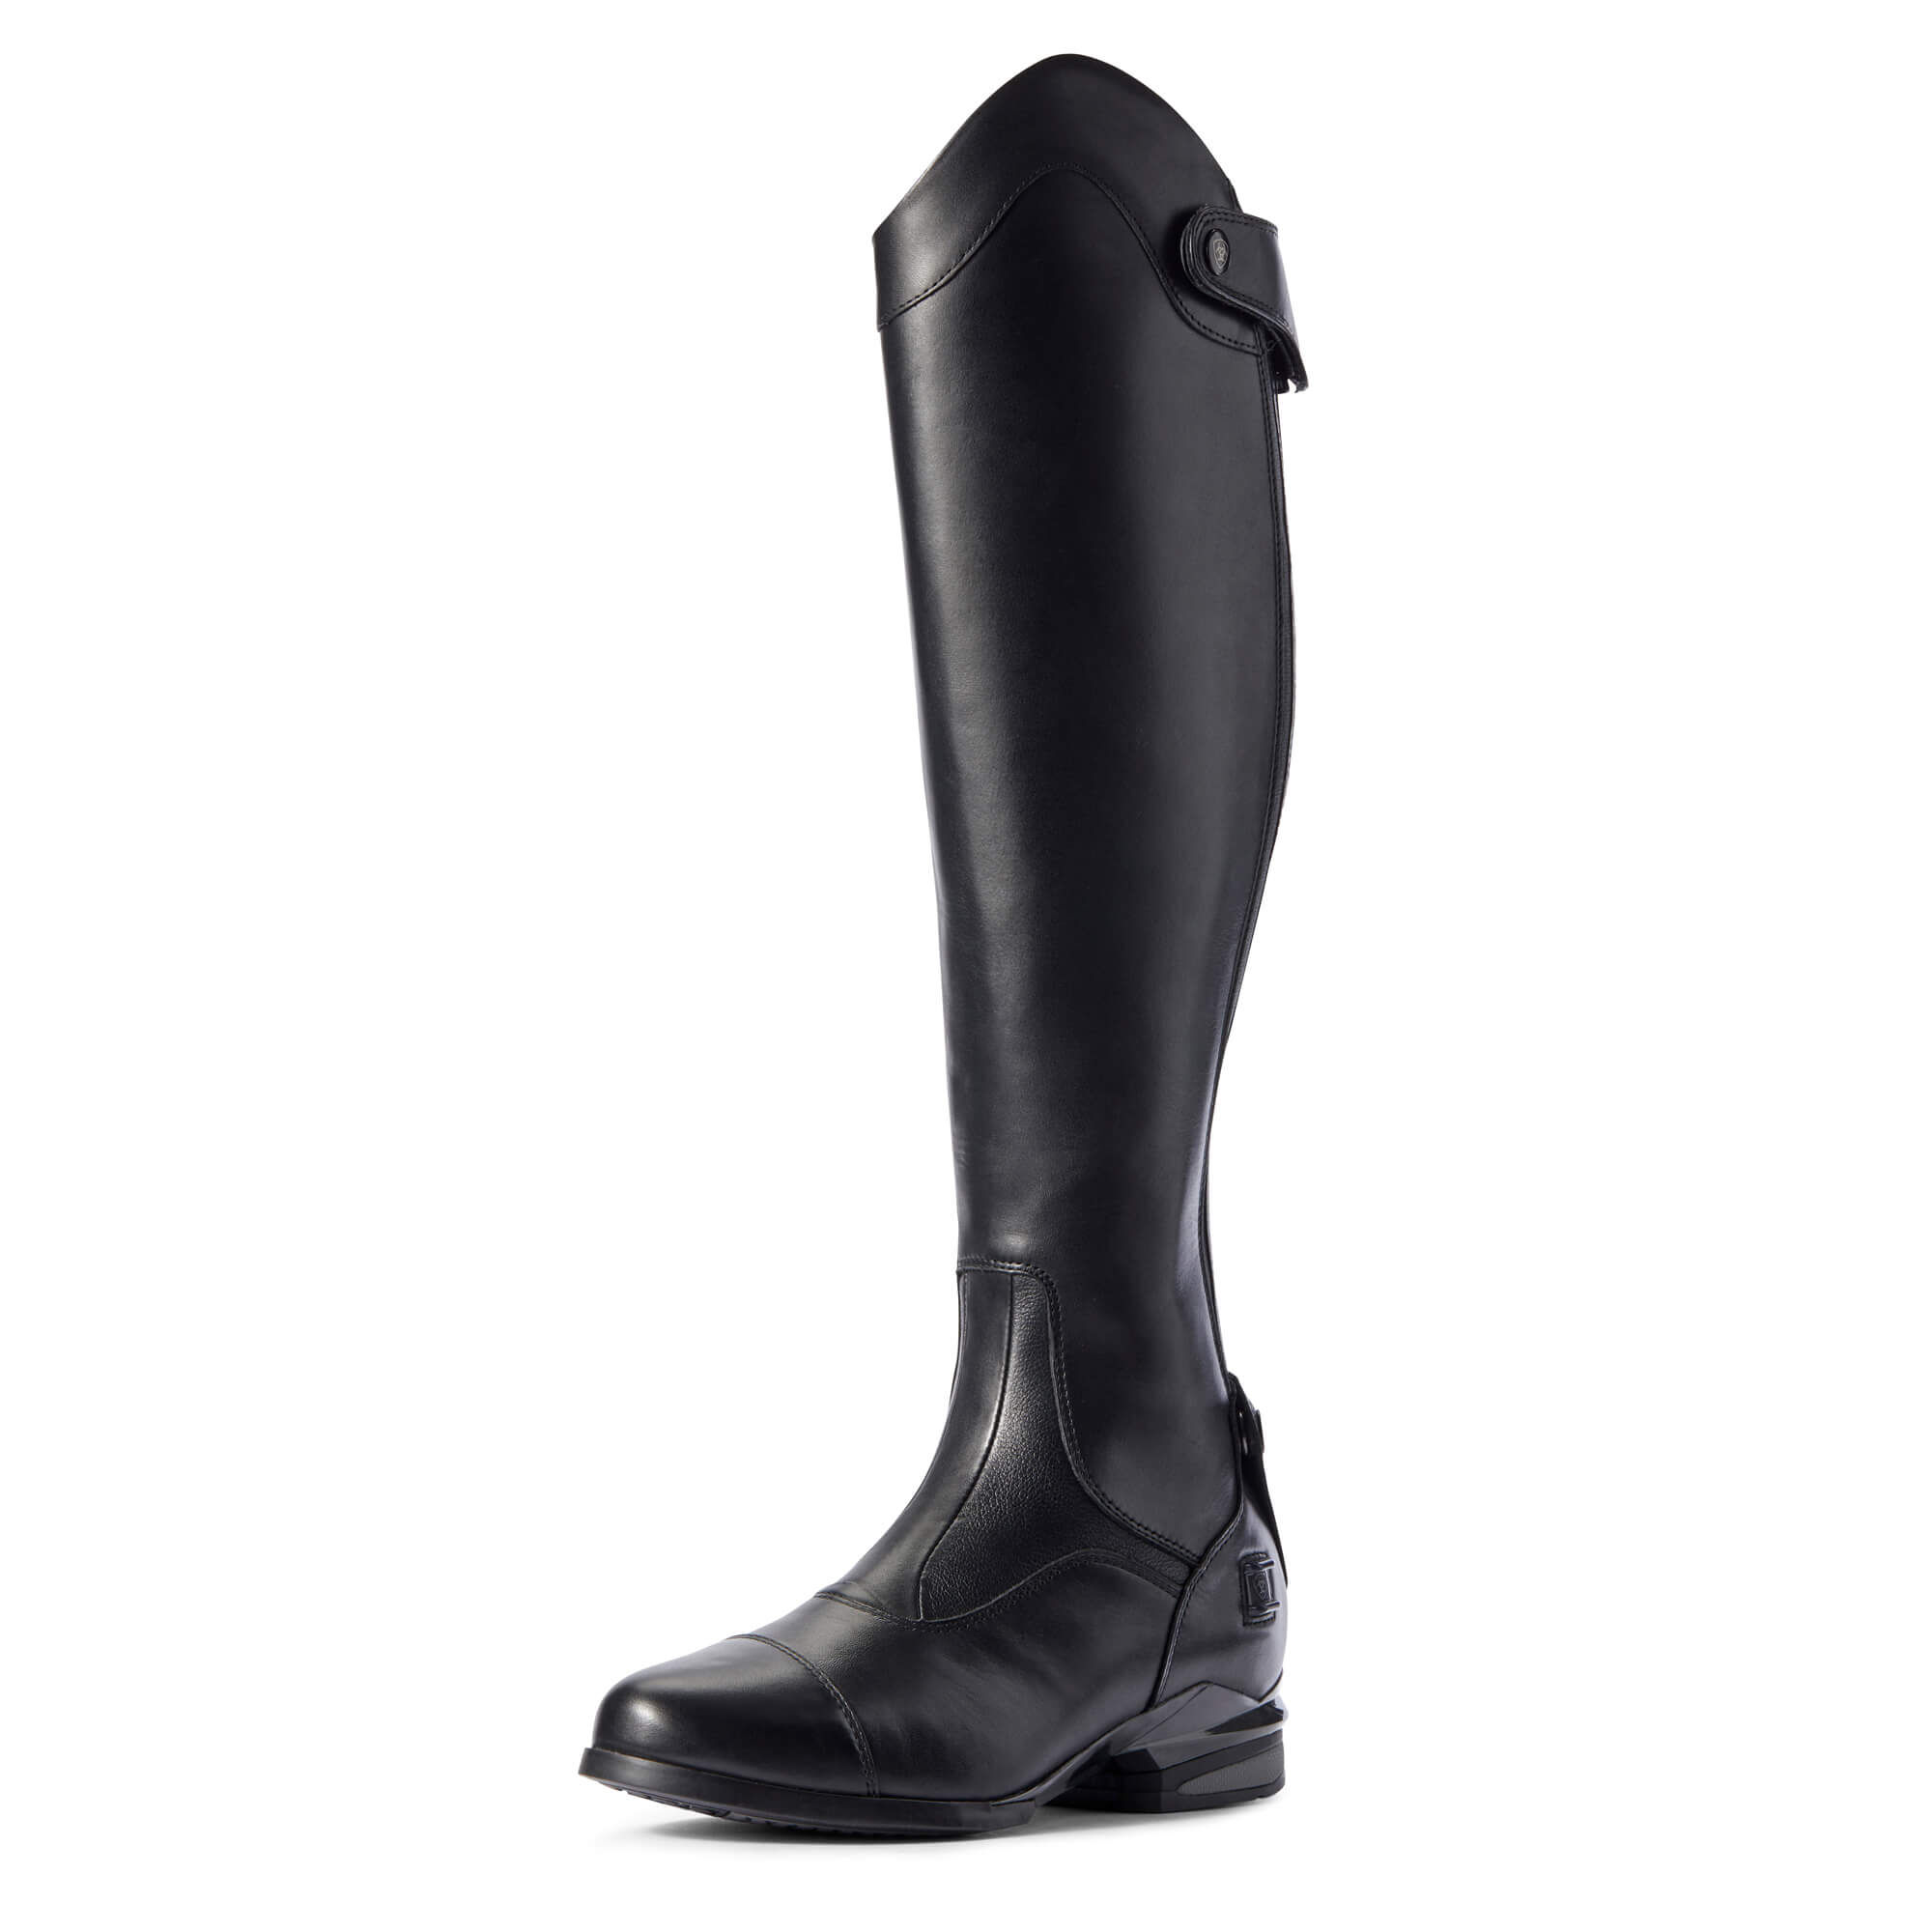 Women's Nitro Max Tall Riding Boots in Black Leather  Full by Ariat